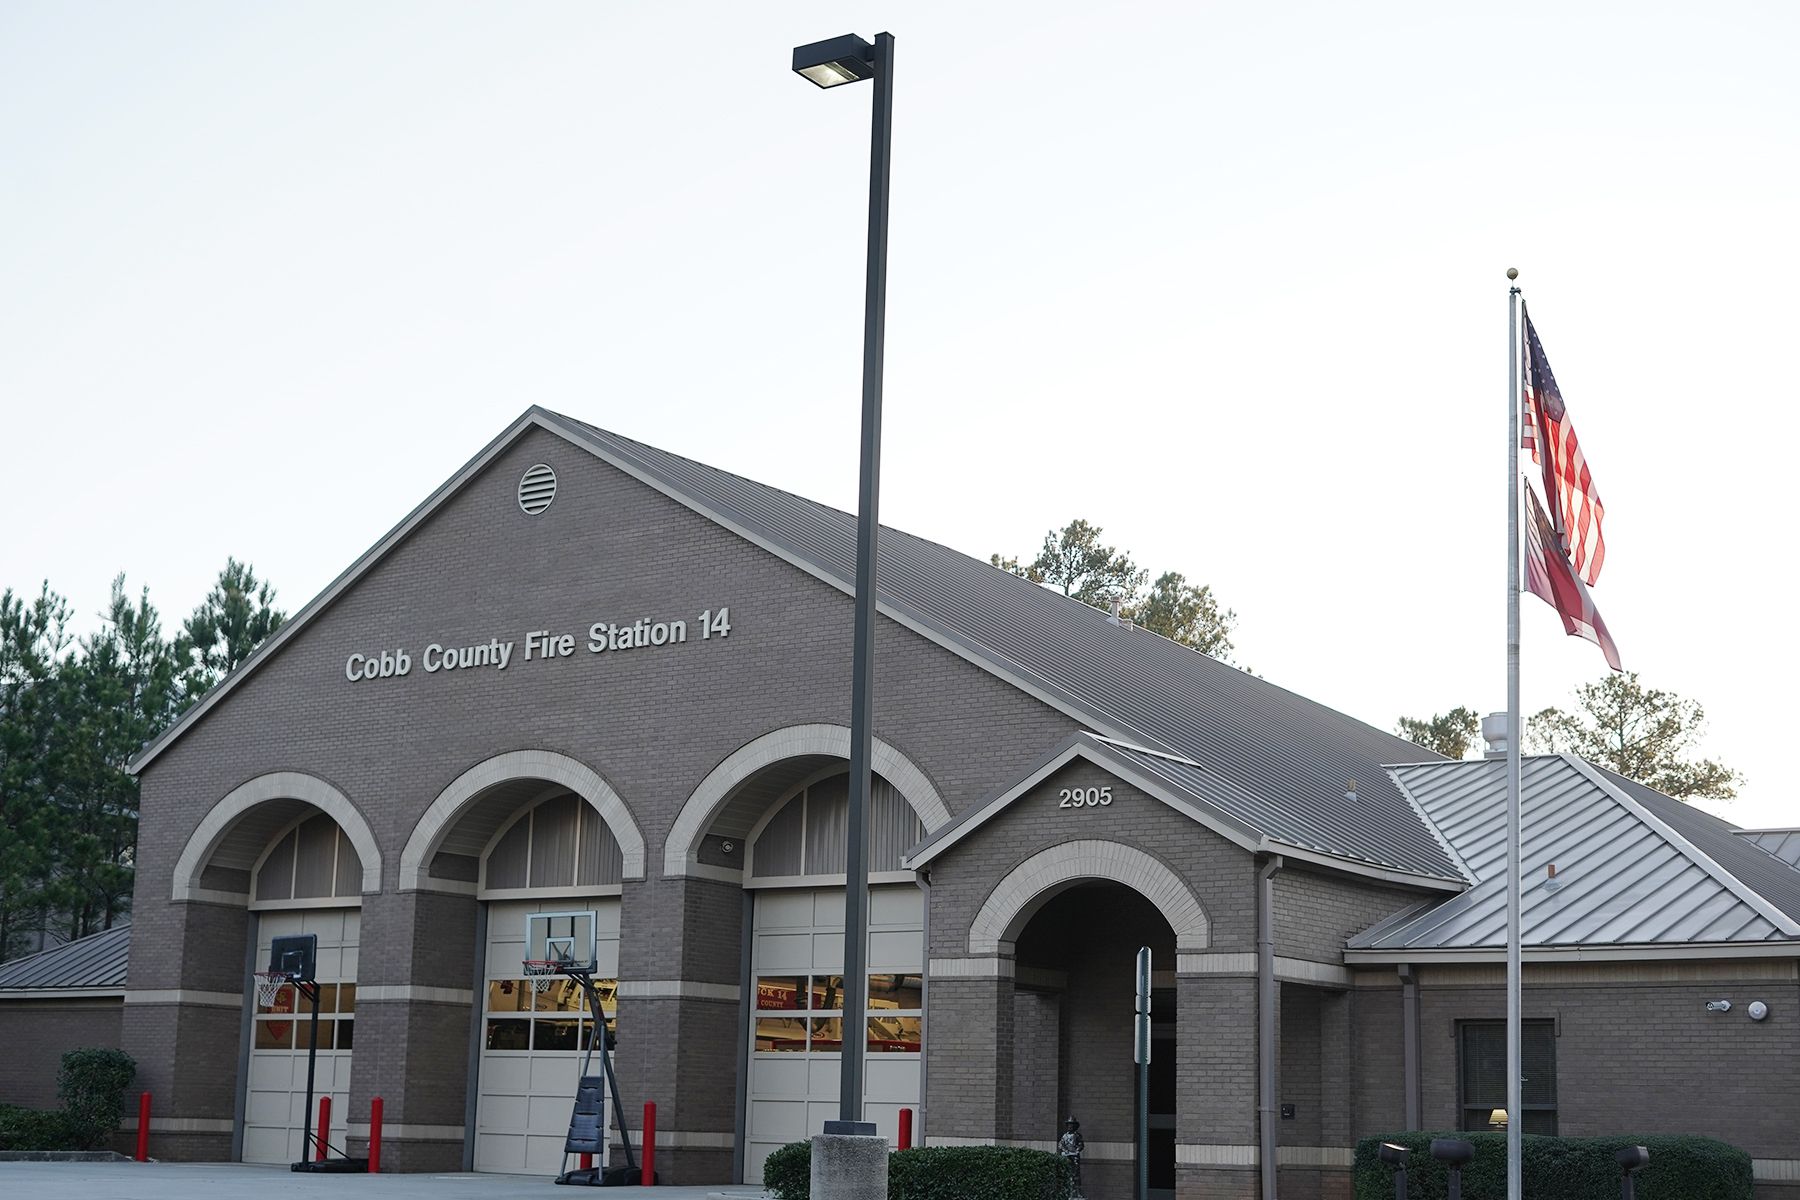 Outside of Fire Station 14